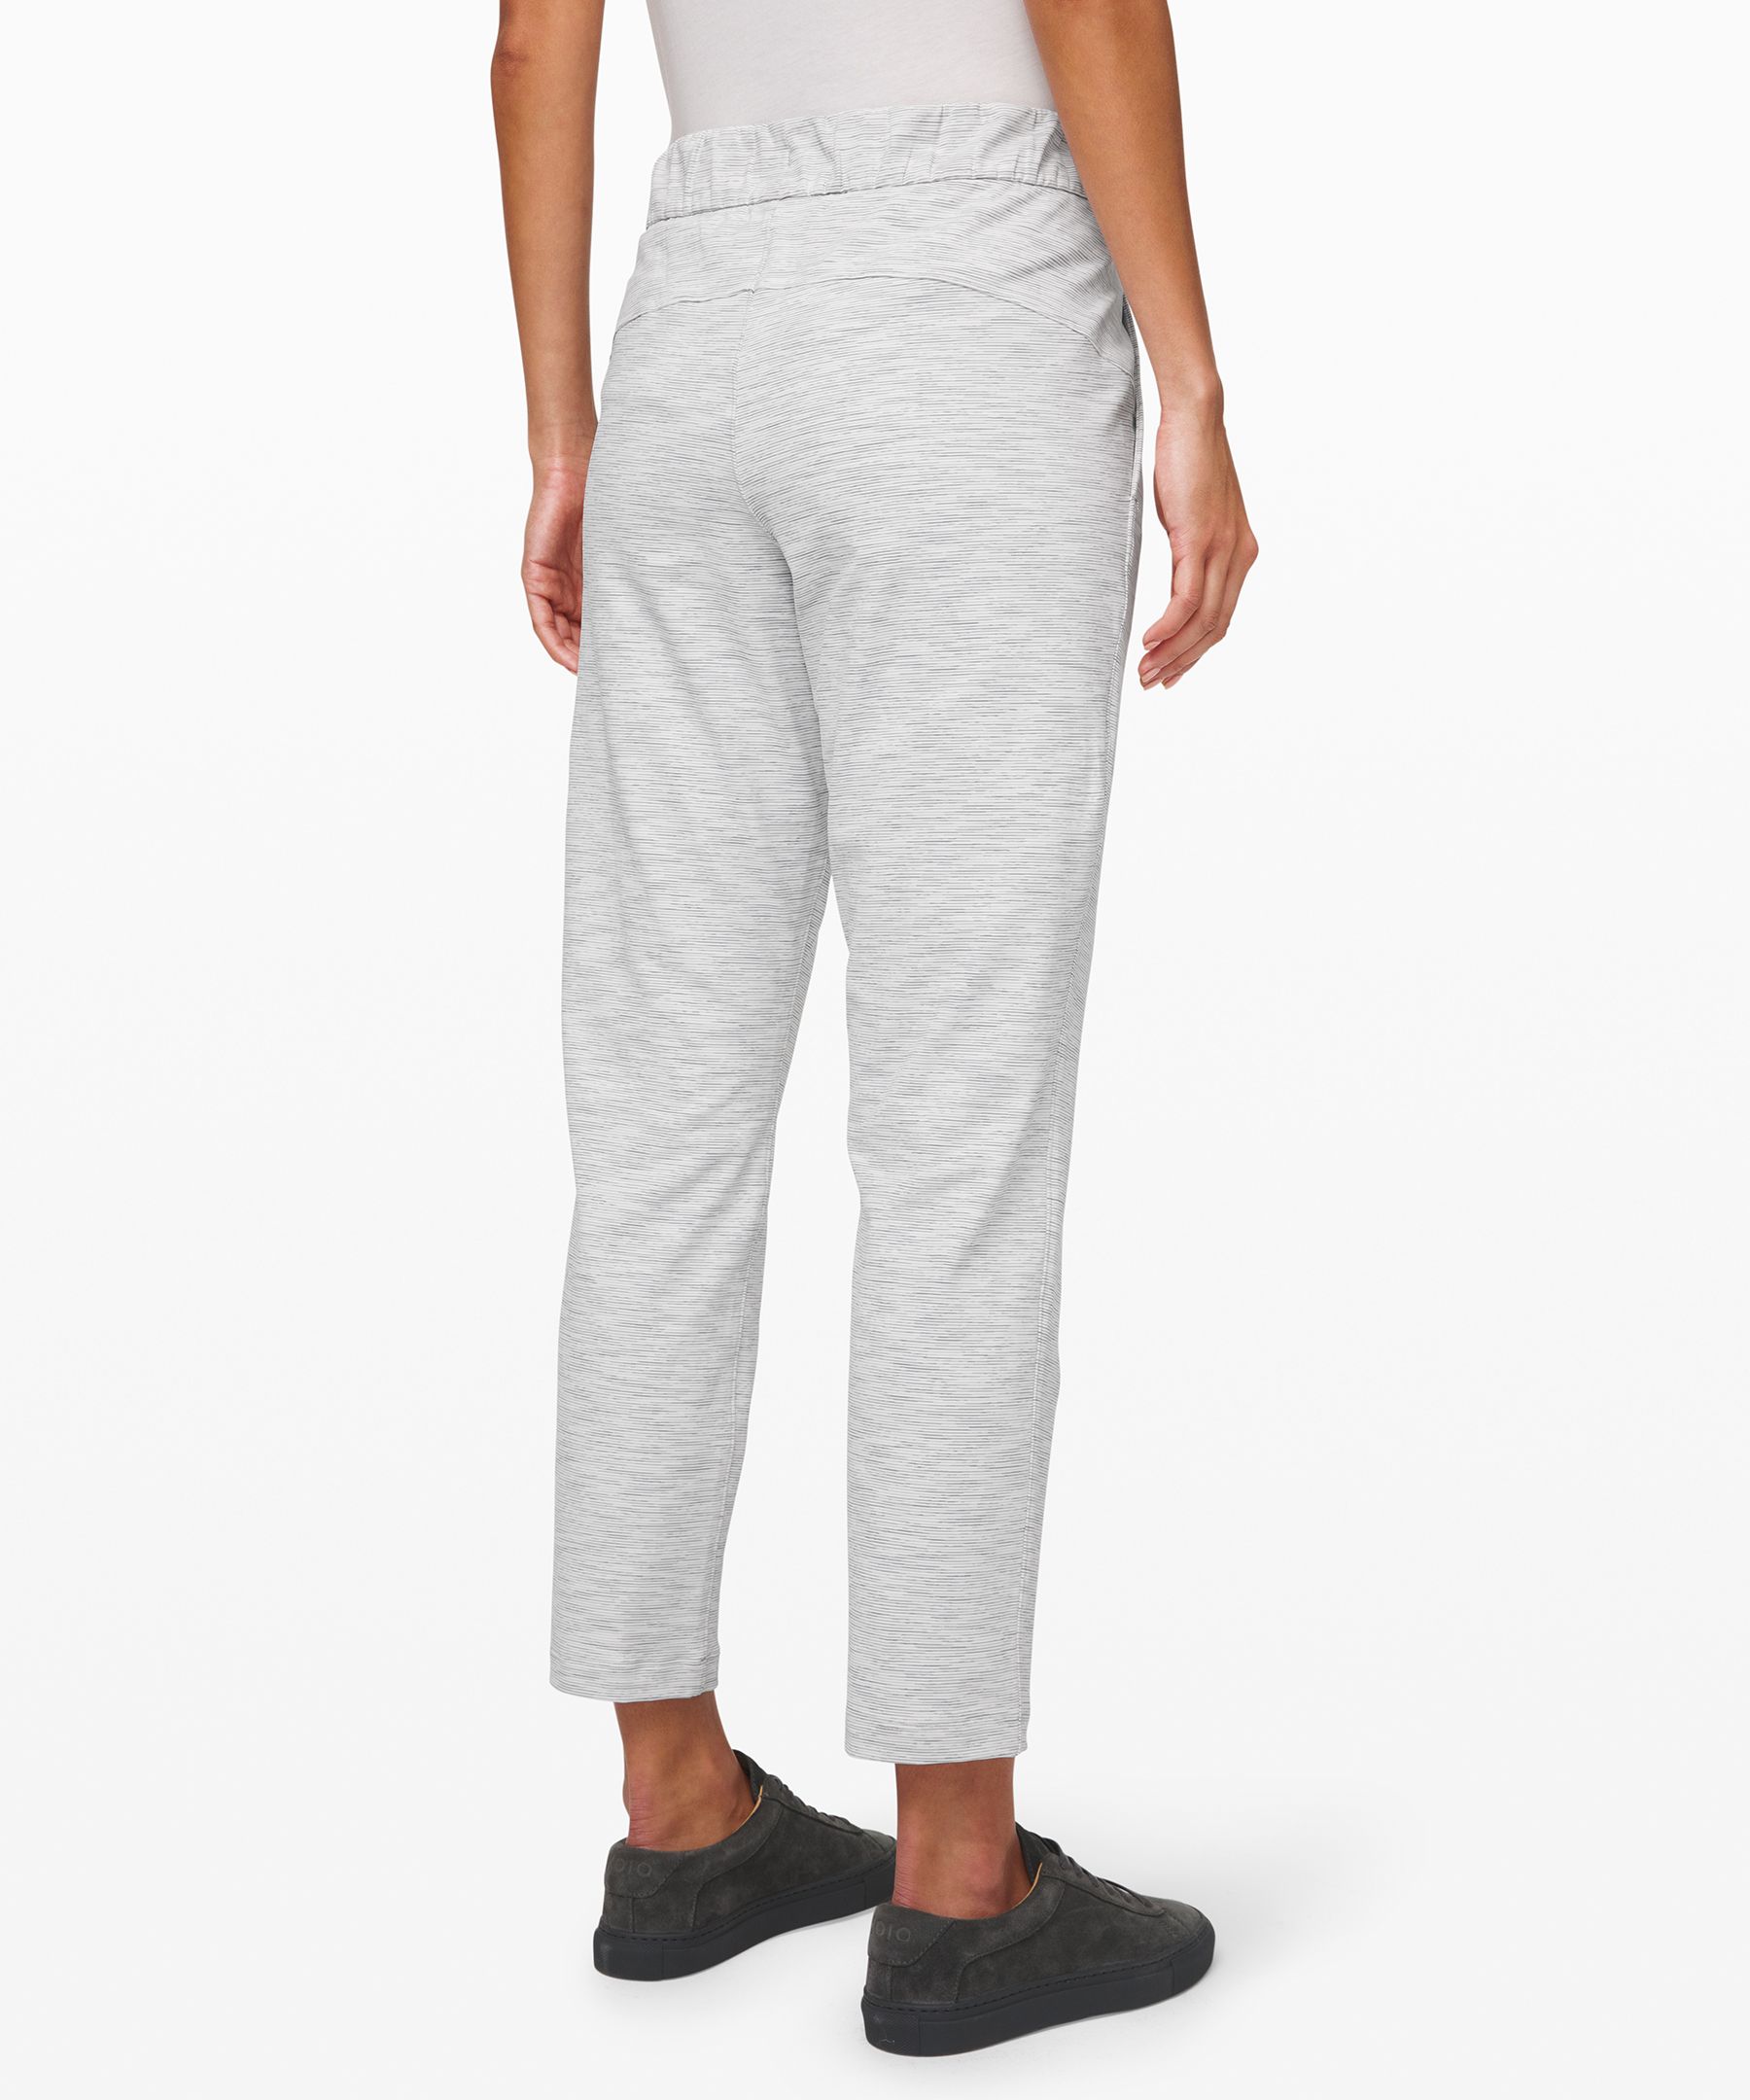 lululemon on the fly pant woven review